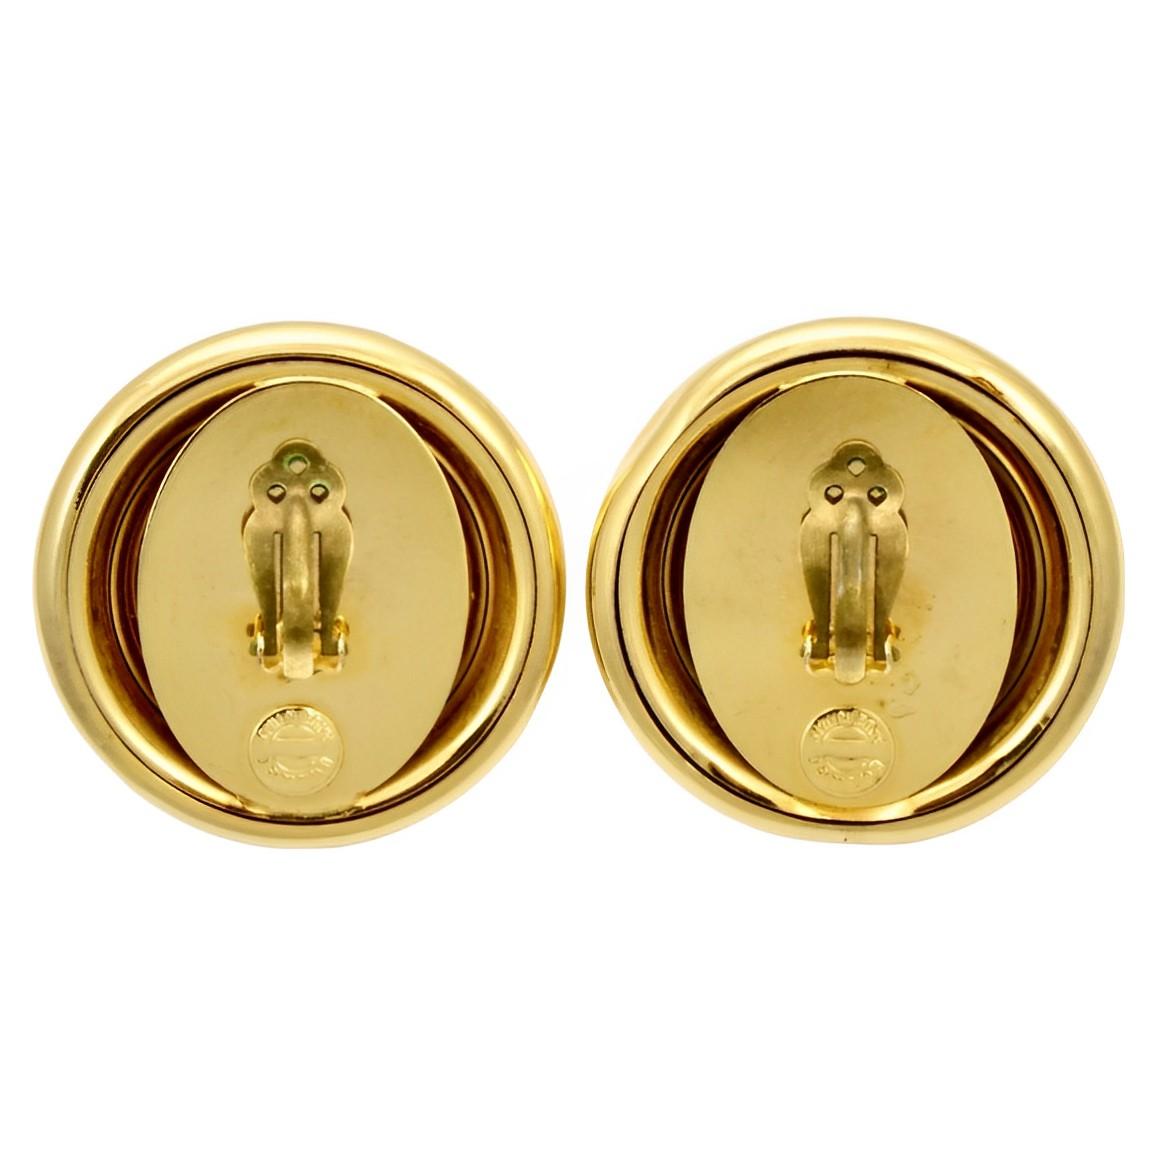 Bozart gold plated clip on earrings, featuring white faux pearls encircled by a double rope twist design. Measuring diameter 4.8 cm / 1.88 inches. The earrings are in very good condition.

This beautiful pair of statement earrings is circa 1980s.